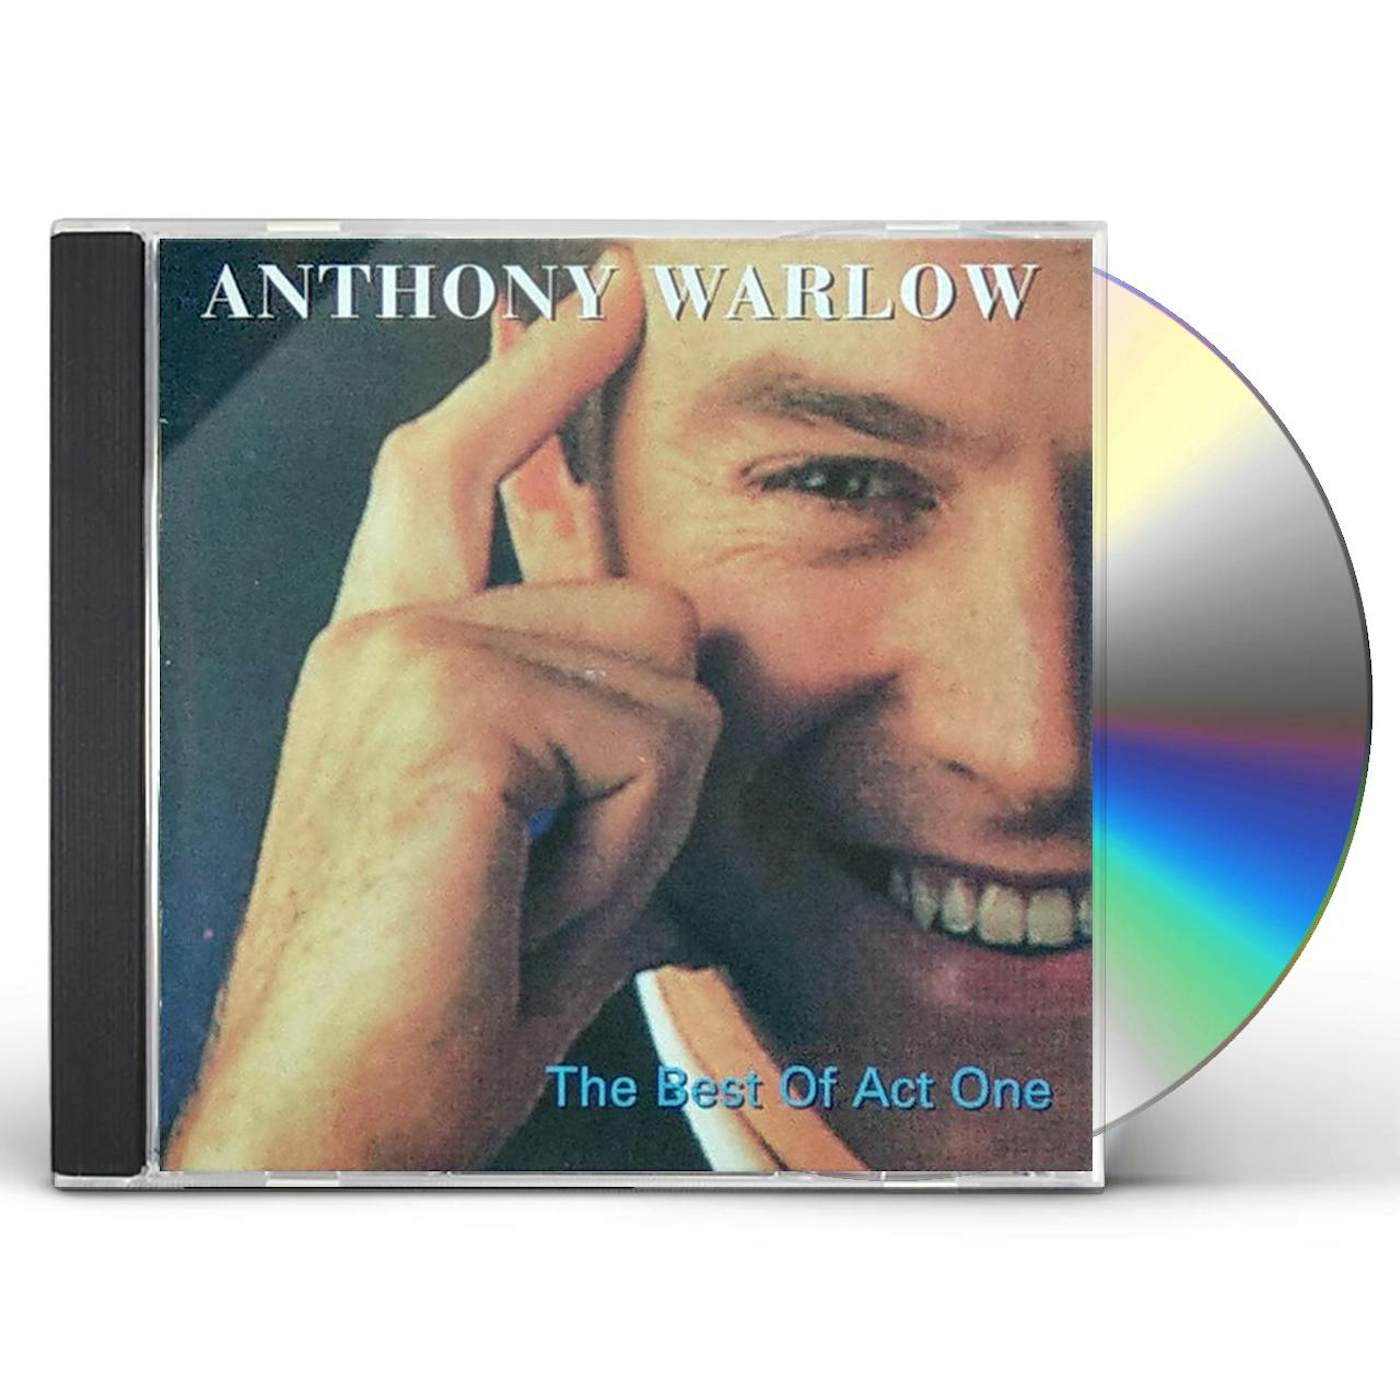 Anthony Warlow BEST OF ACT ONE CD